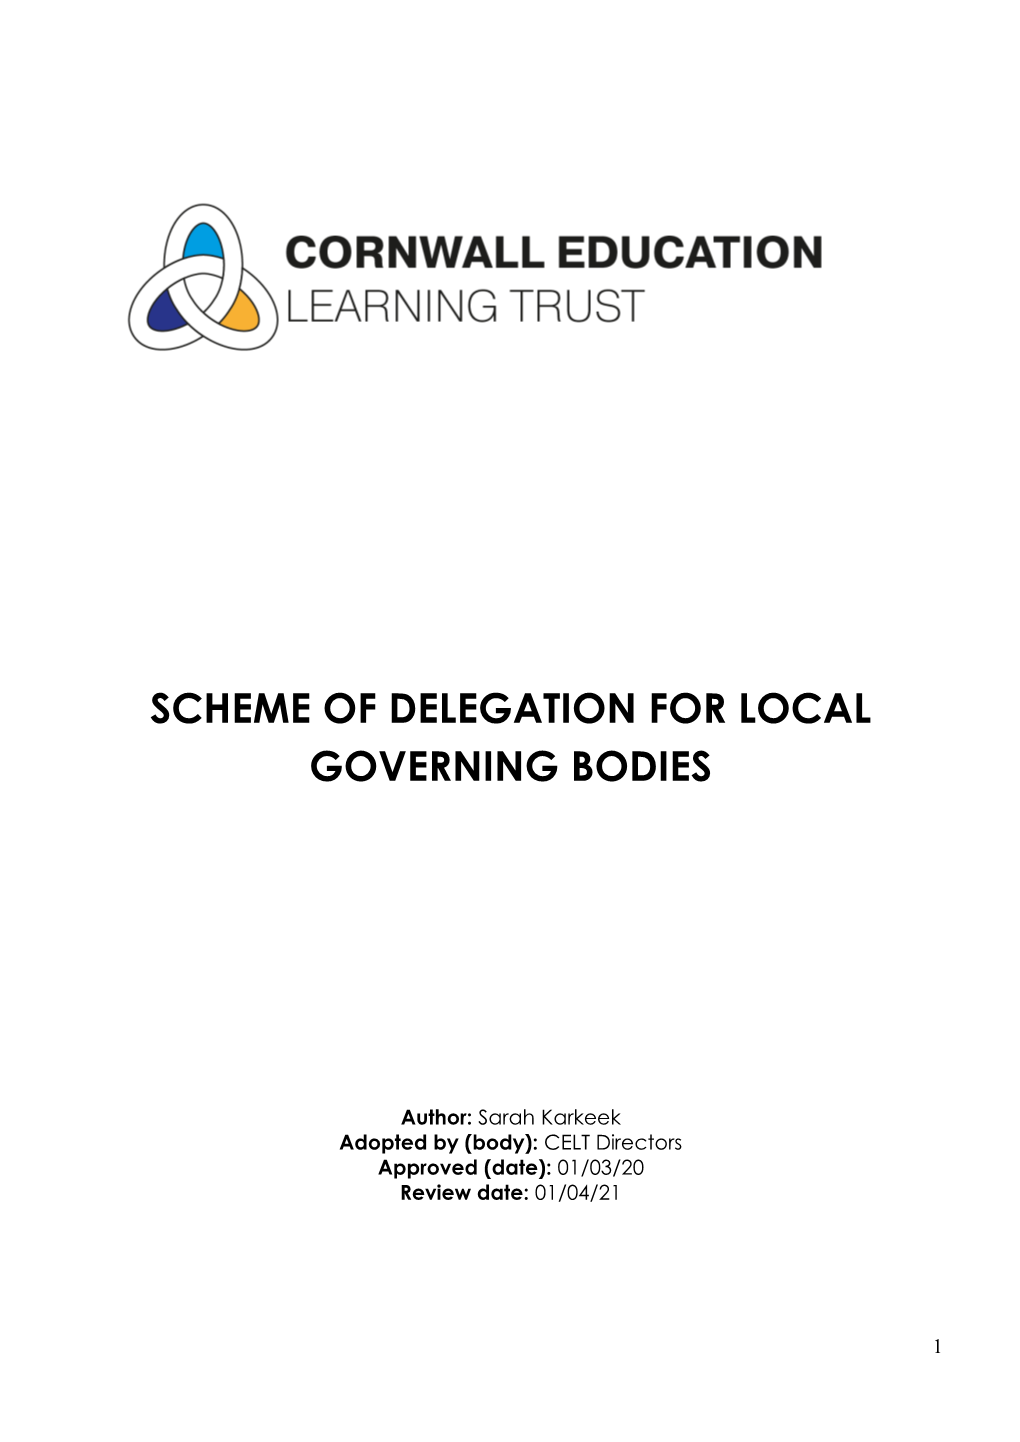 Scheme of Delegation for Local Governing Bodies